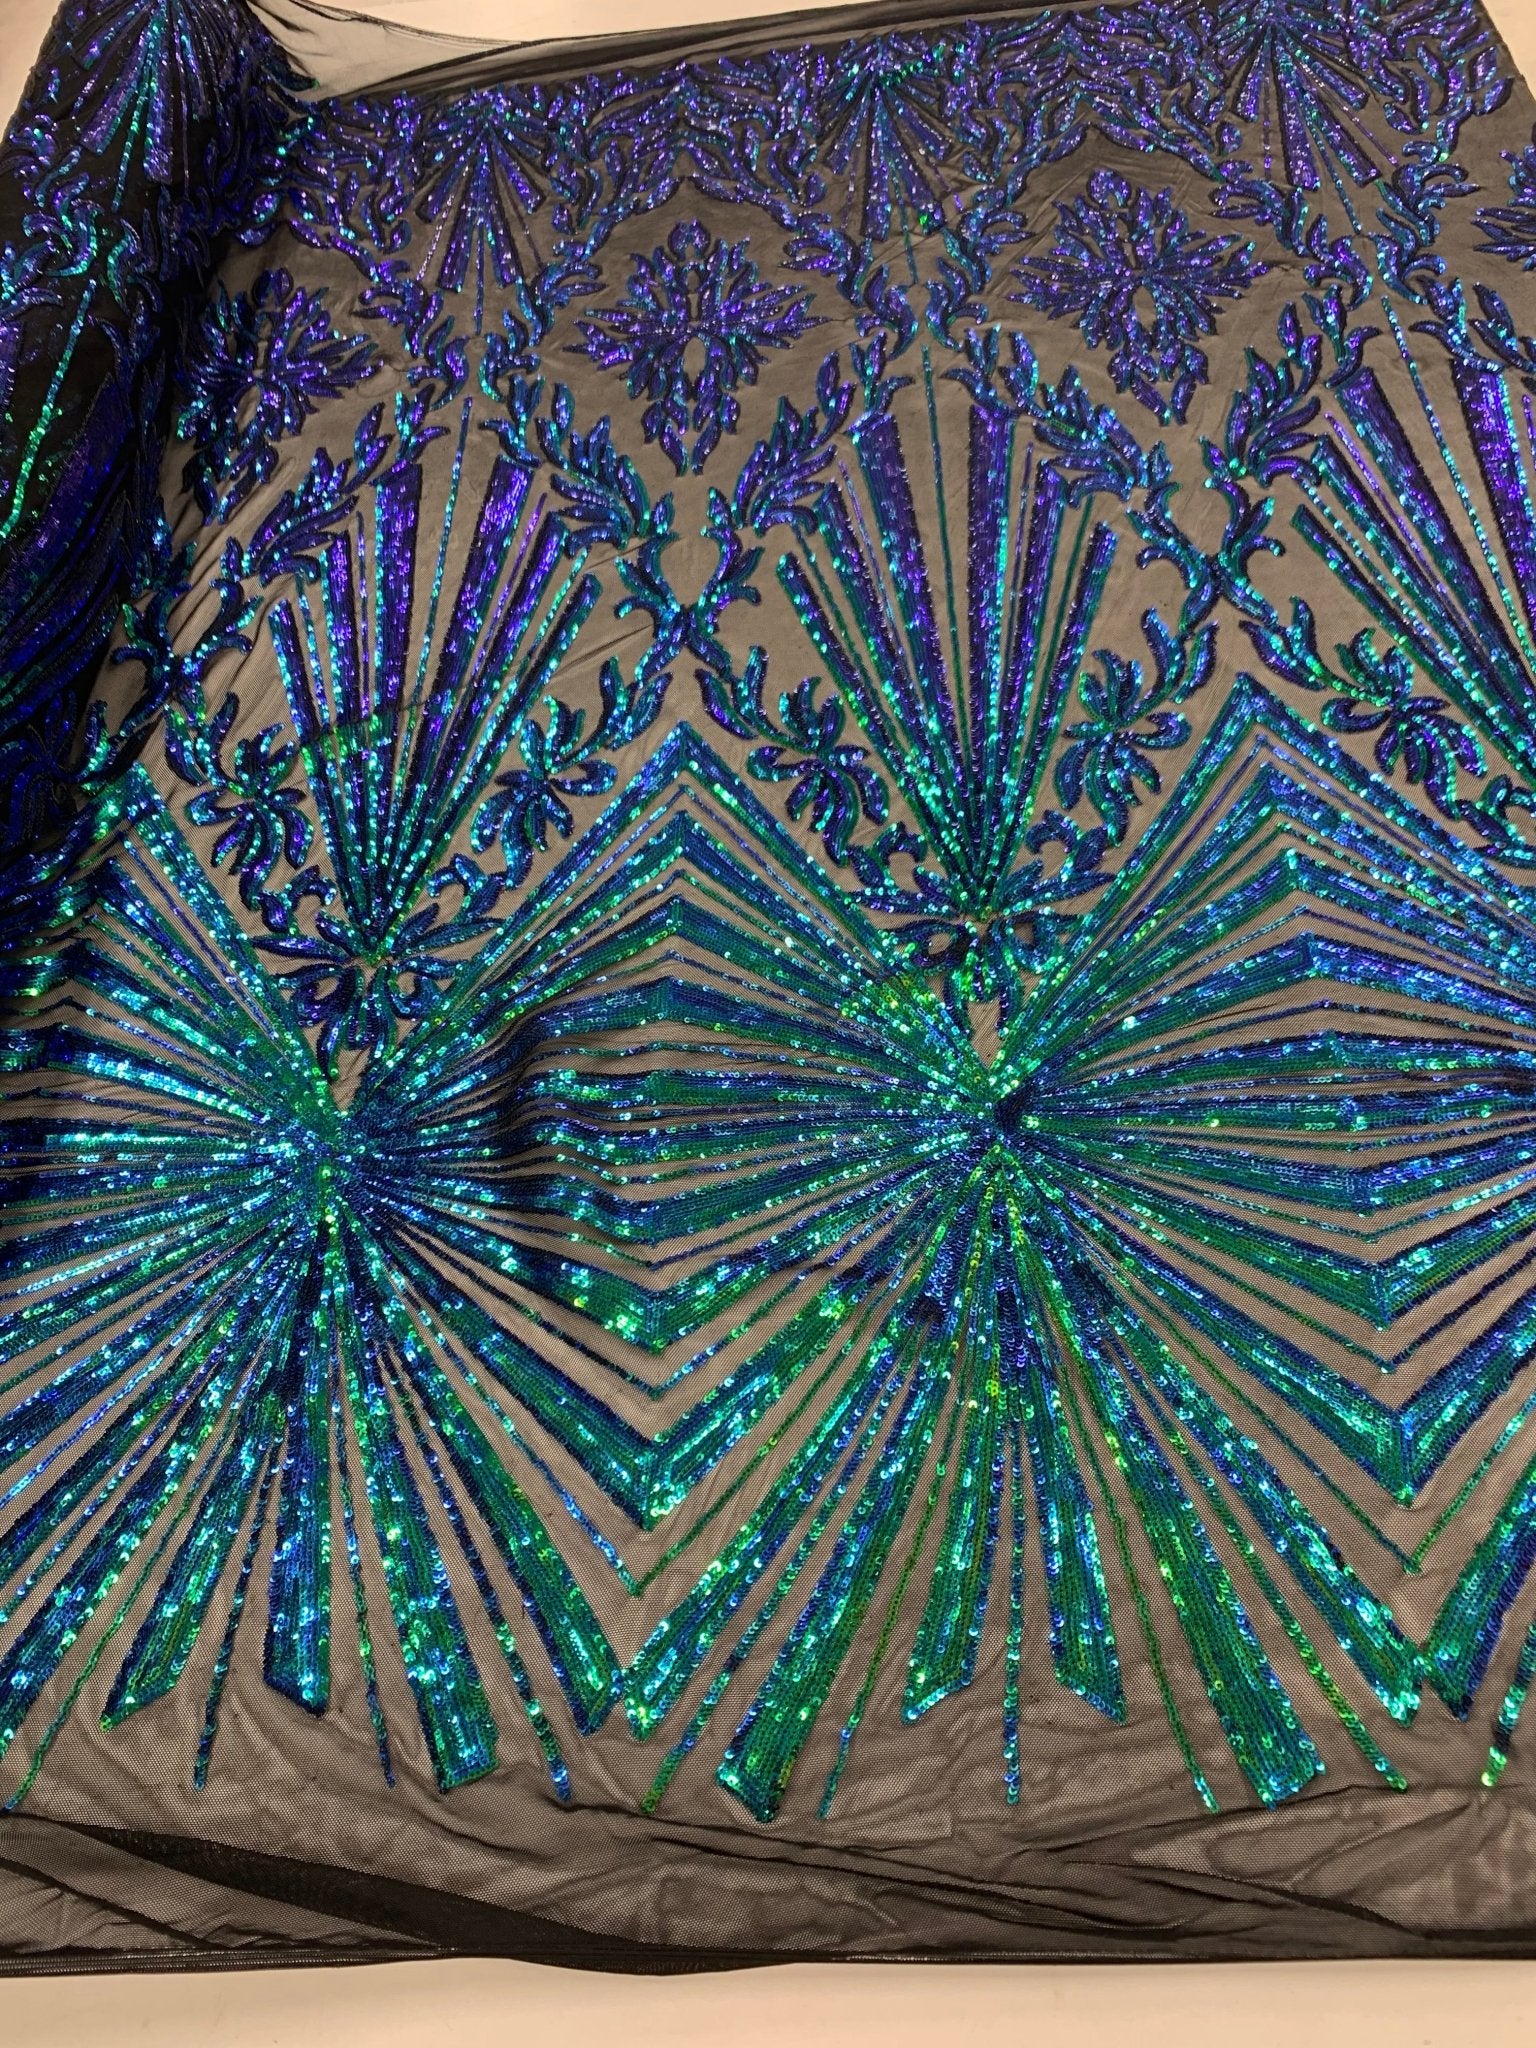 Iridescent Green Luxury Stretch Sequin Bridal Embroidery on Black Mesh Lace FabricICEFABRICICE FABRICSIridescent GreenIridescent Green Luxury Stretch Sequin Bridal Embroidery on Black Mesh Lace Fabric ICEFABRIC